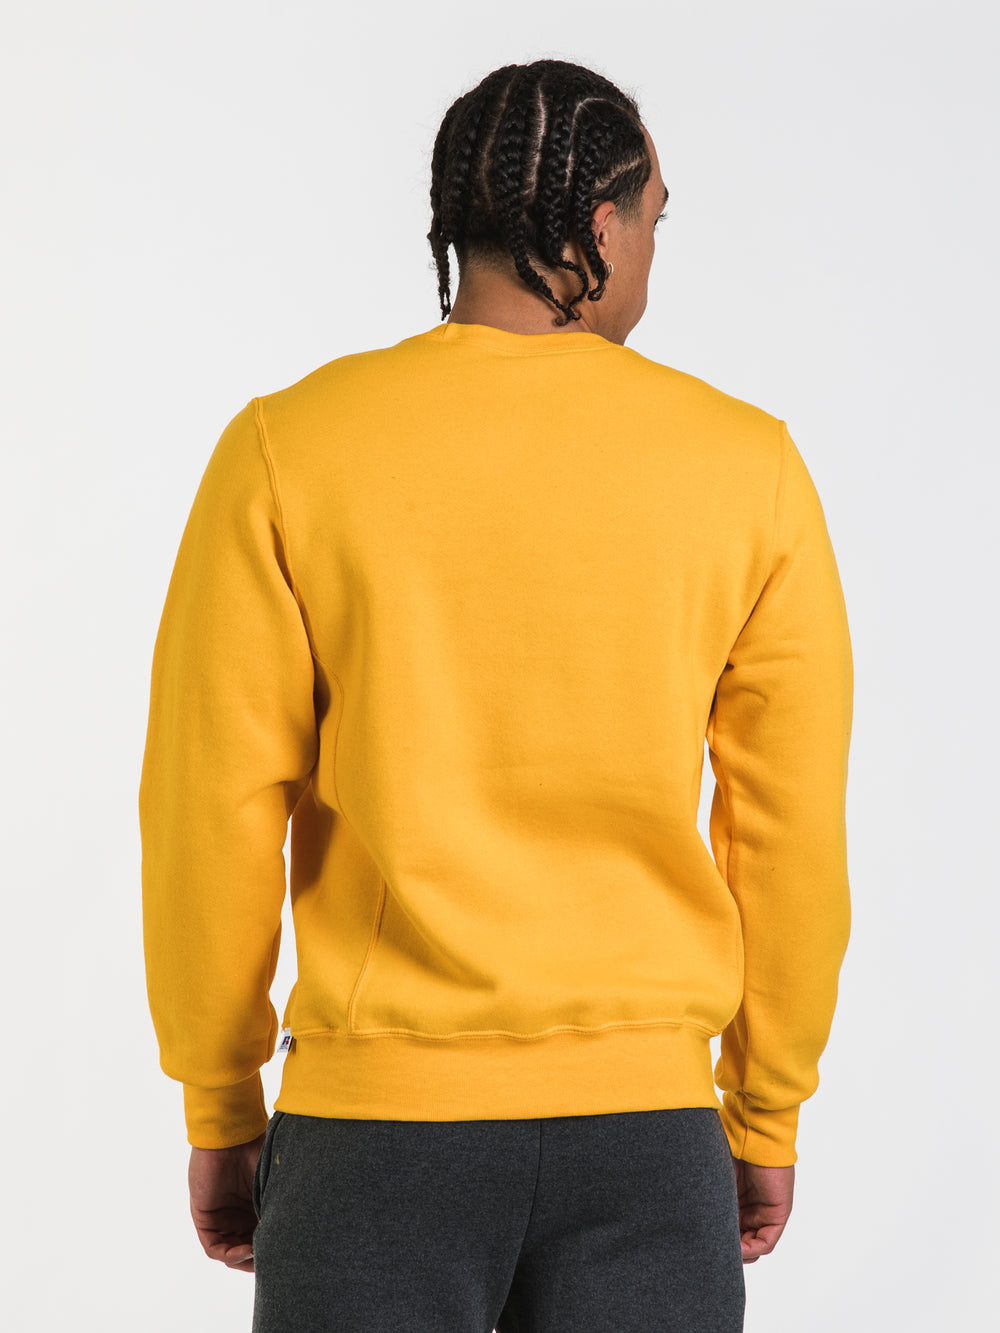 RUSSELL LSU CREWNECK - CLEARANCE